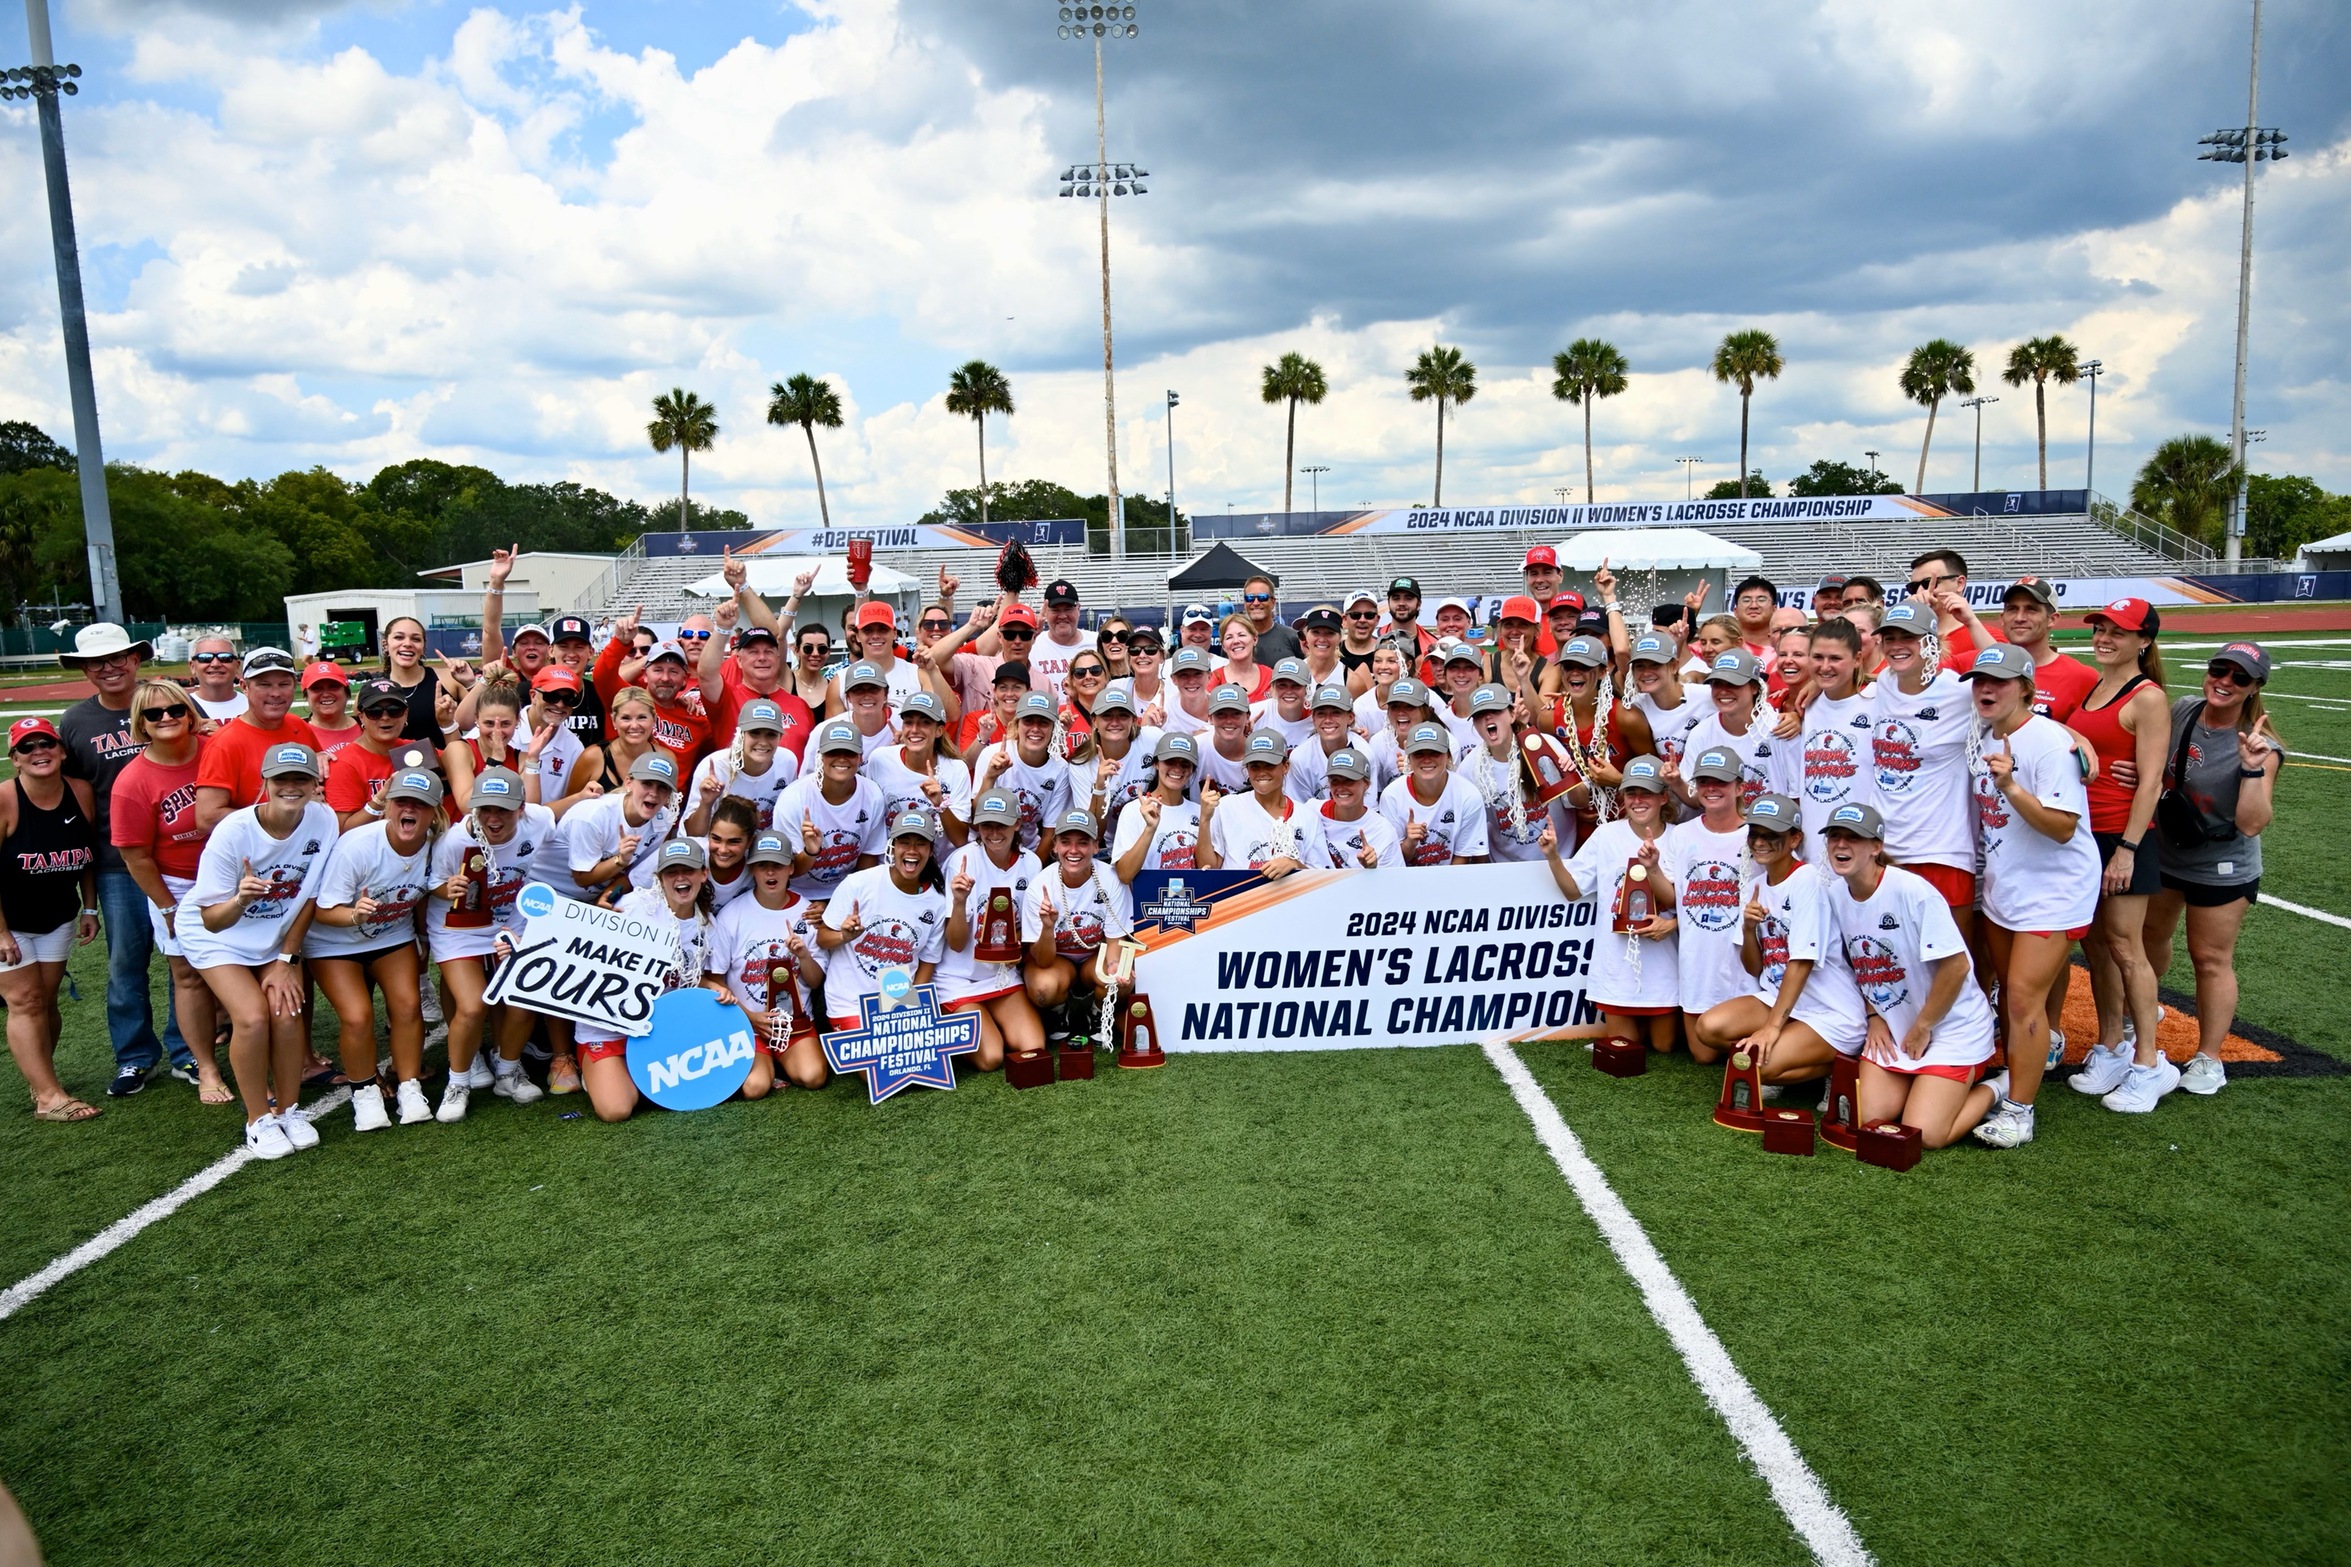 Job Finished: Tampa Crowned National Champions For First Time Following Victory Over Adelphi